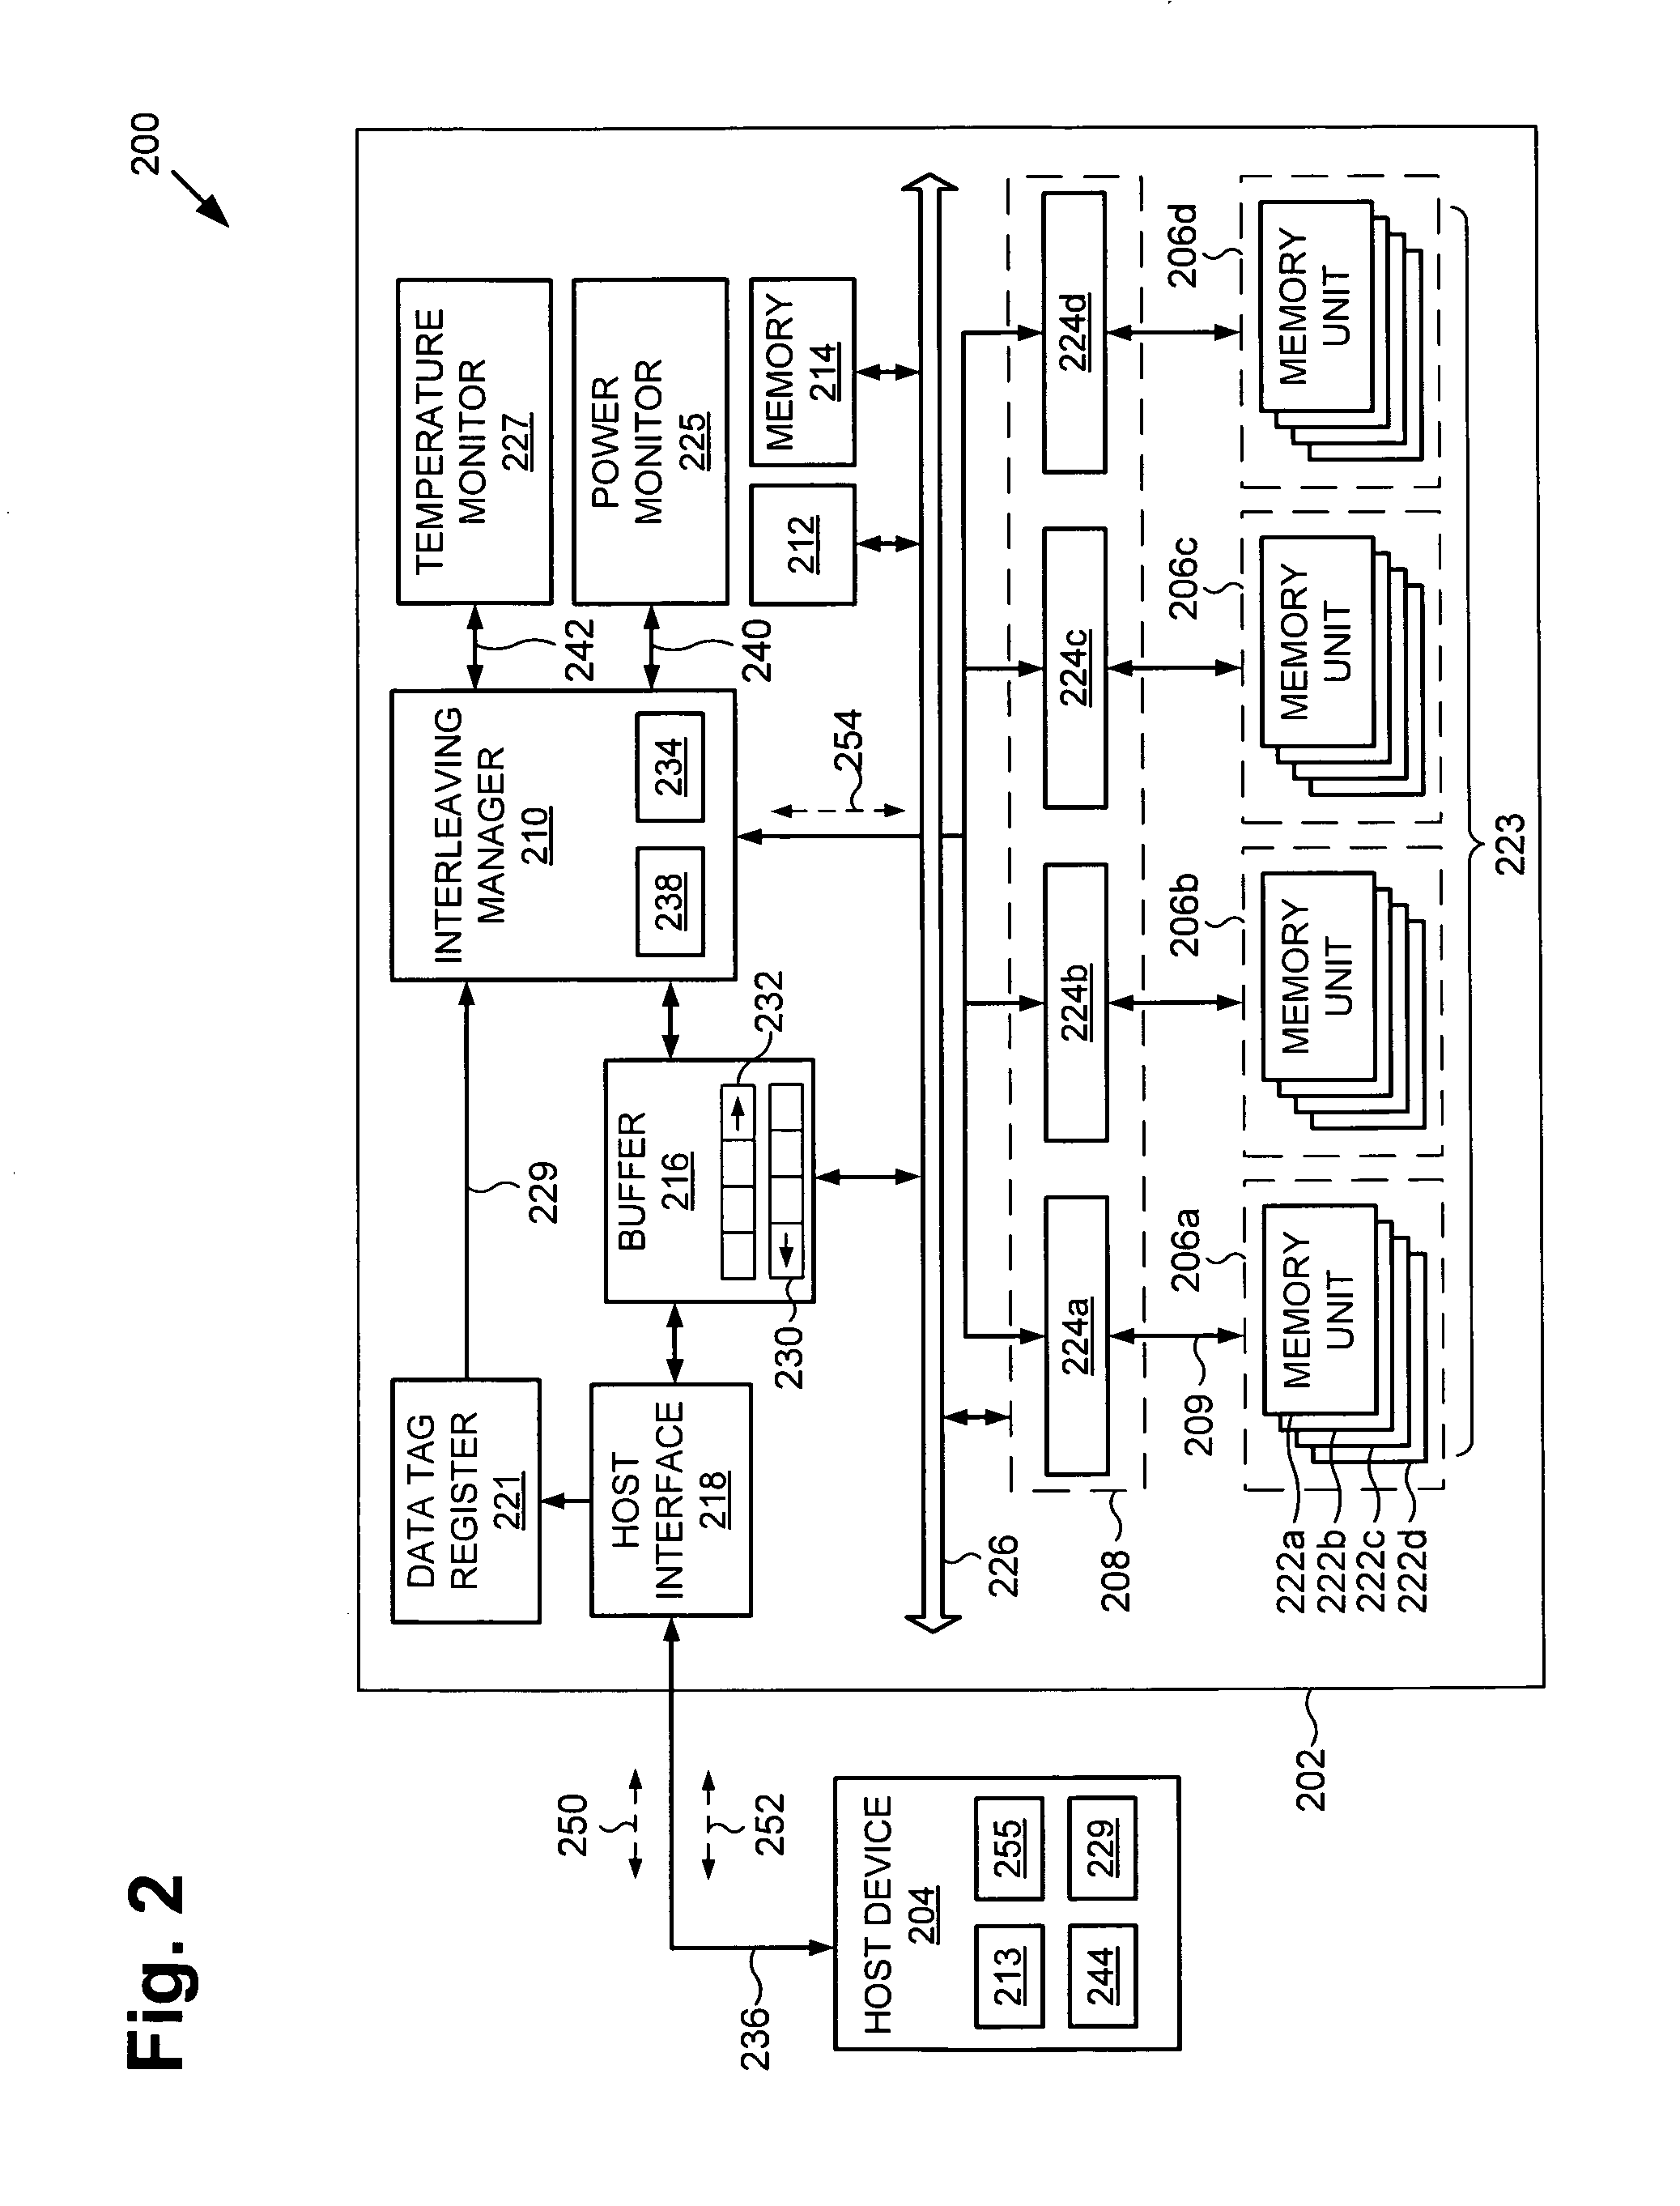 System and method for dynamically adjusting memory performance